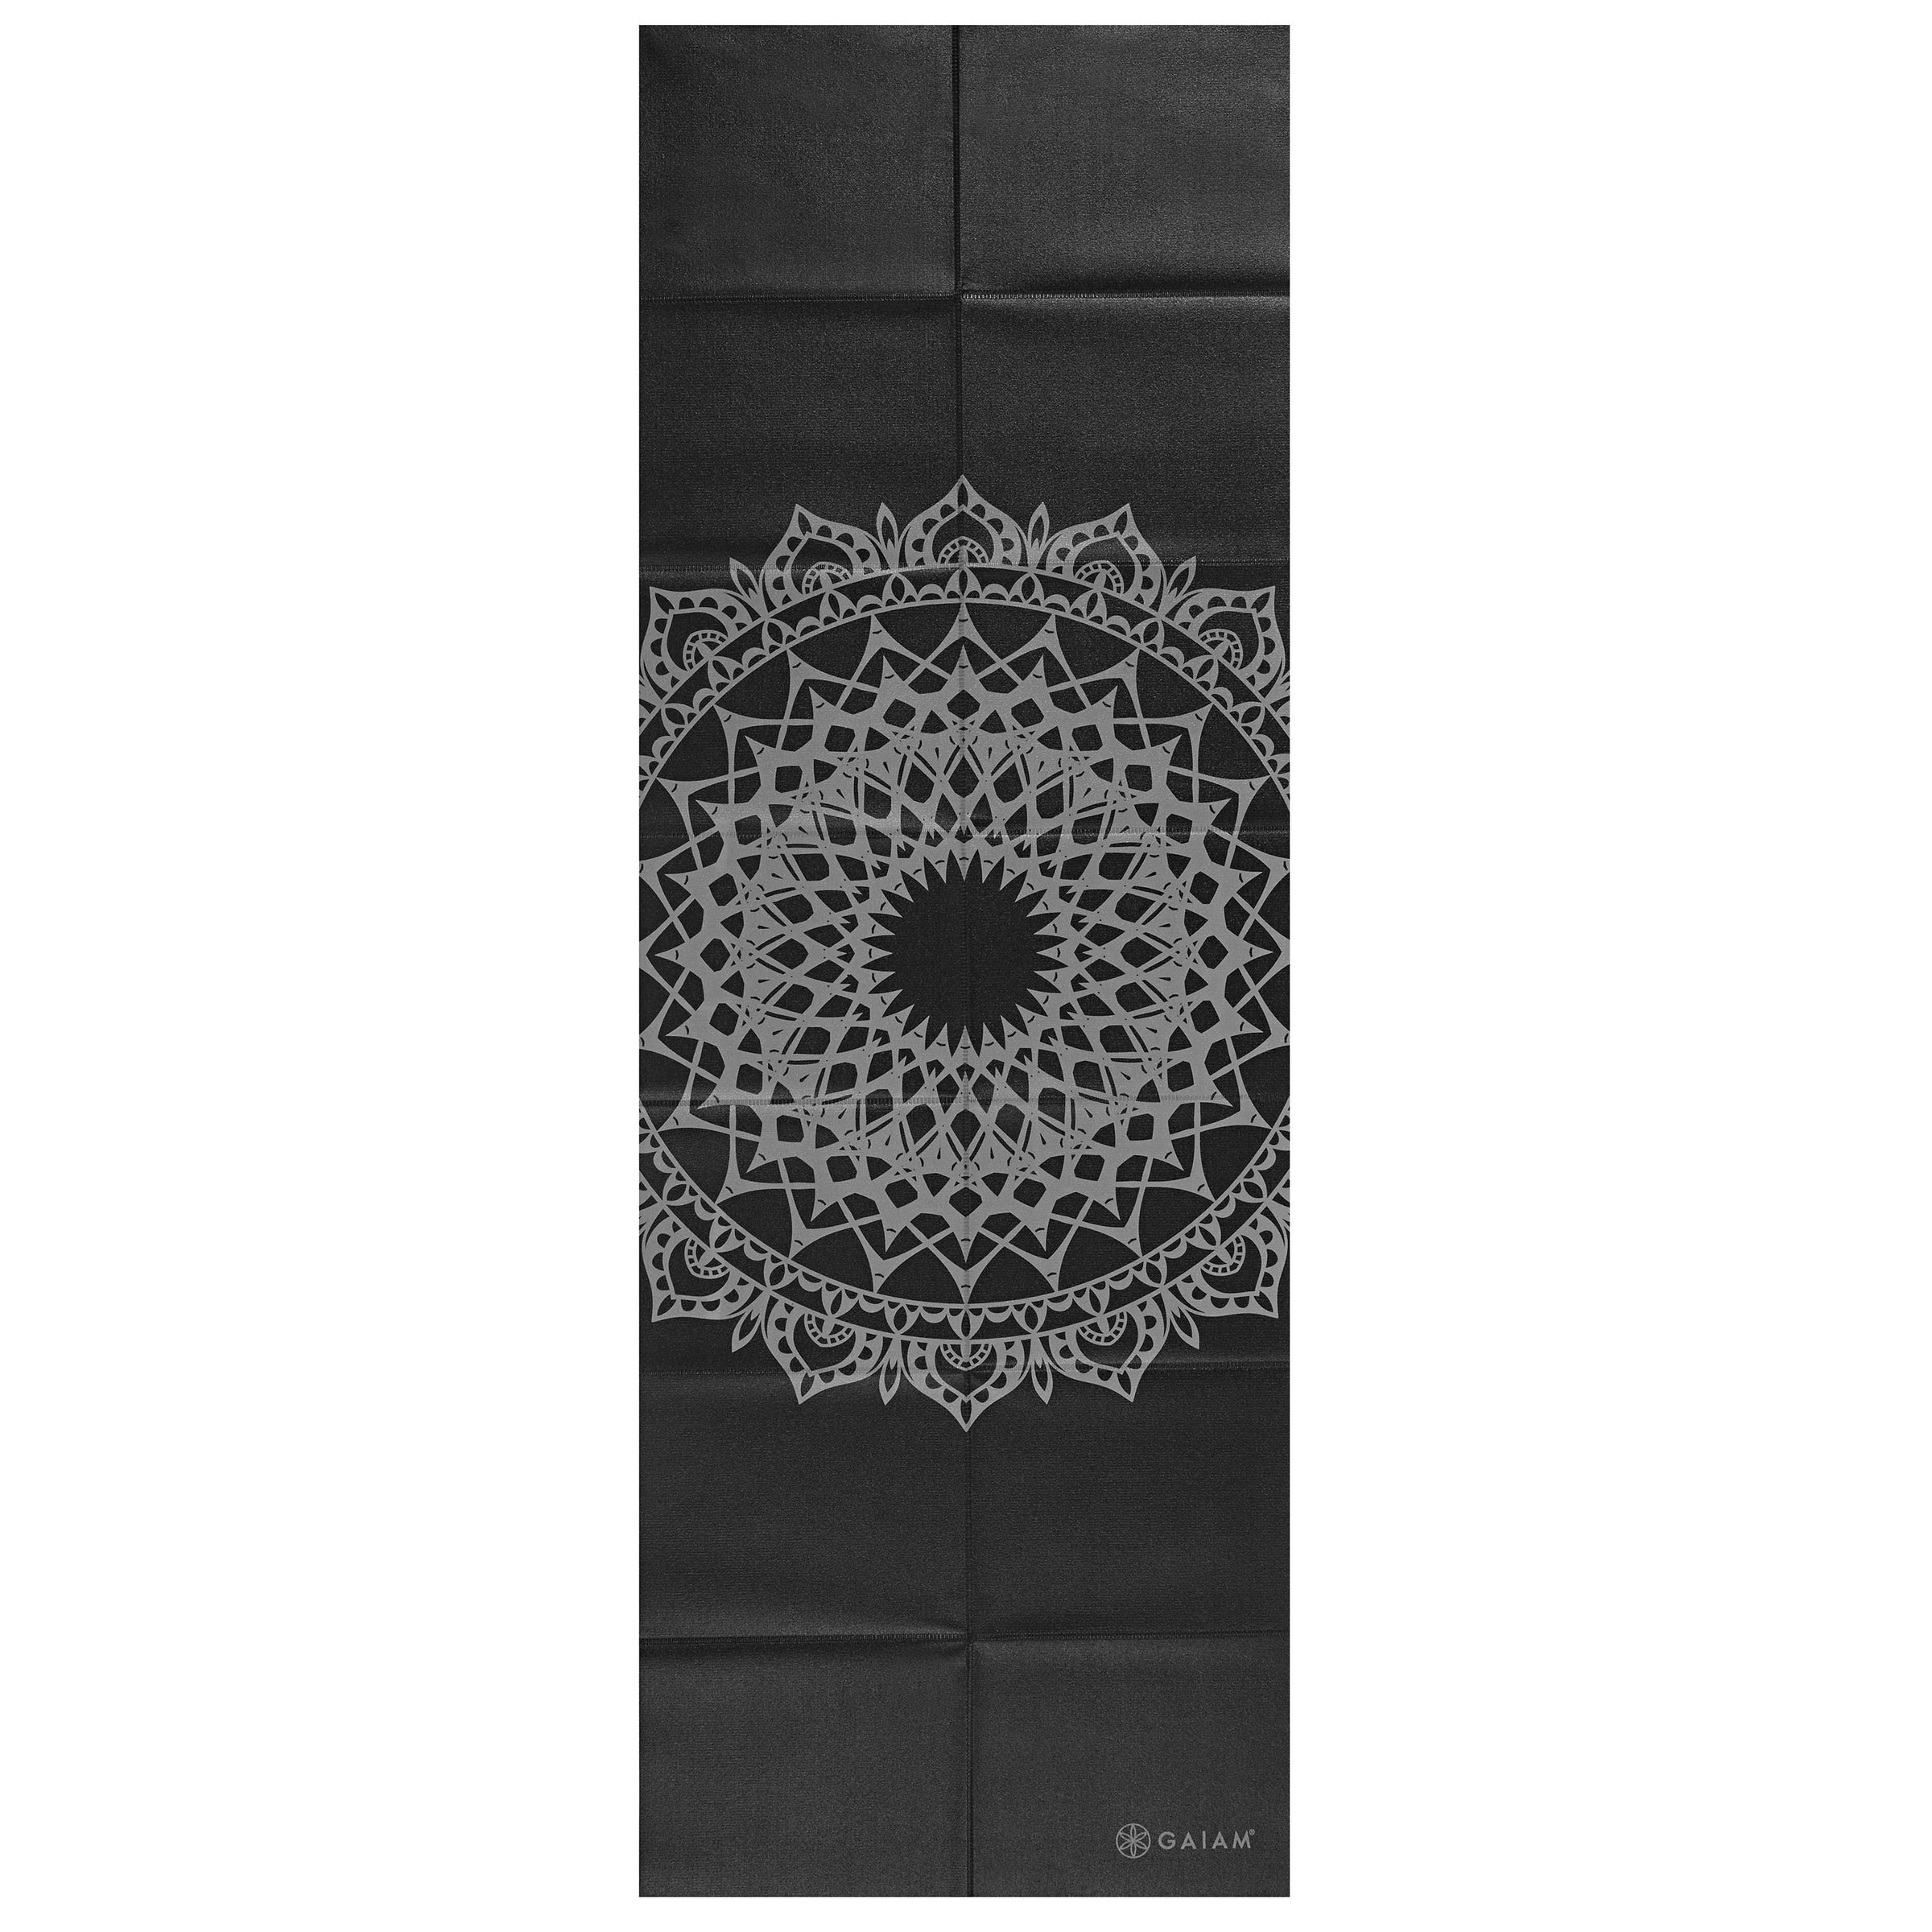 Gaiam Yoga Mat Folding Travel Fitness & Exercise Mat  Foldable Yoga Mat  for All Types of Yoga, Pilates & Floor Workouts, Be Free, 2mm, 68L x 24W  x 2mm Thick : Sports & Outdoors 